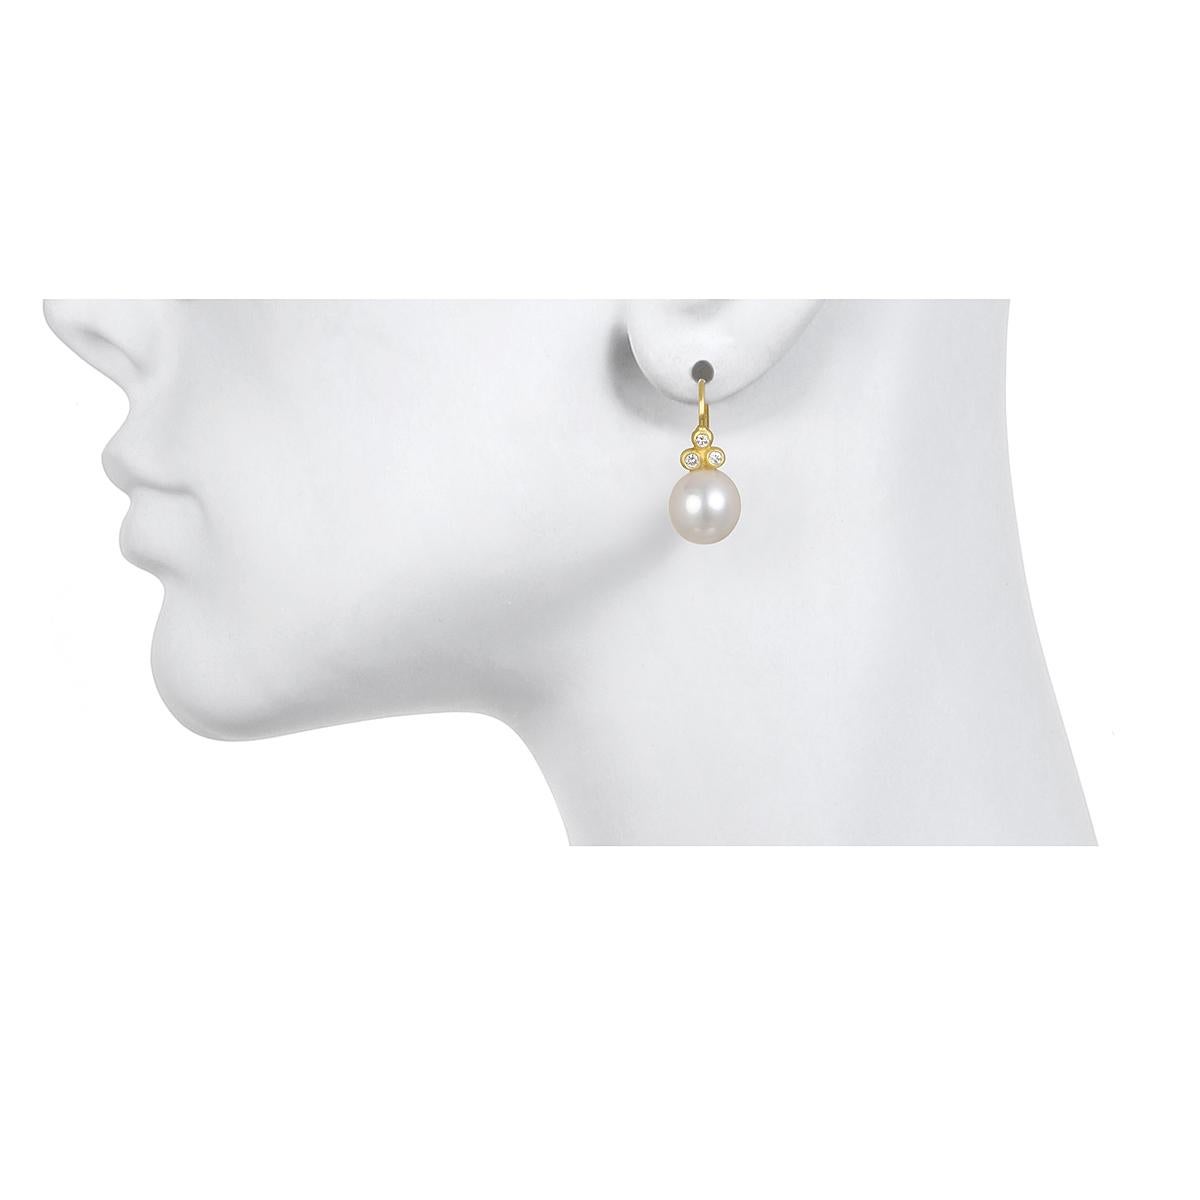 Beautiful triple white diamonds are bezel set in 18K* gold and paired with lustrous white freshwater pearls on French ear wires to create modern-day classic drop earrings.  
Casual or corporate, the clean design is flattering and simply